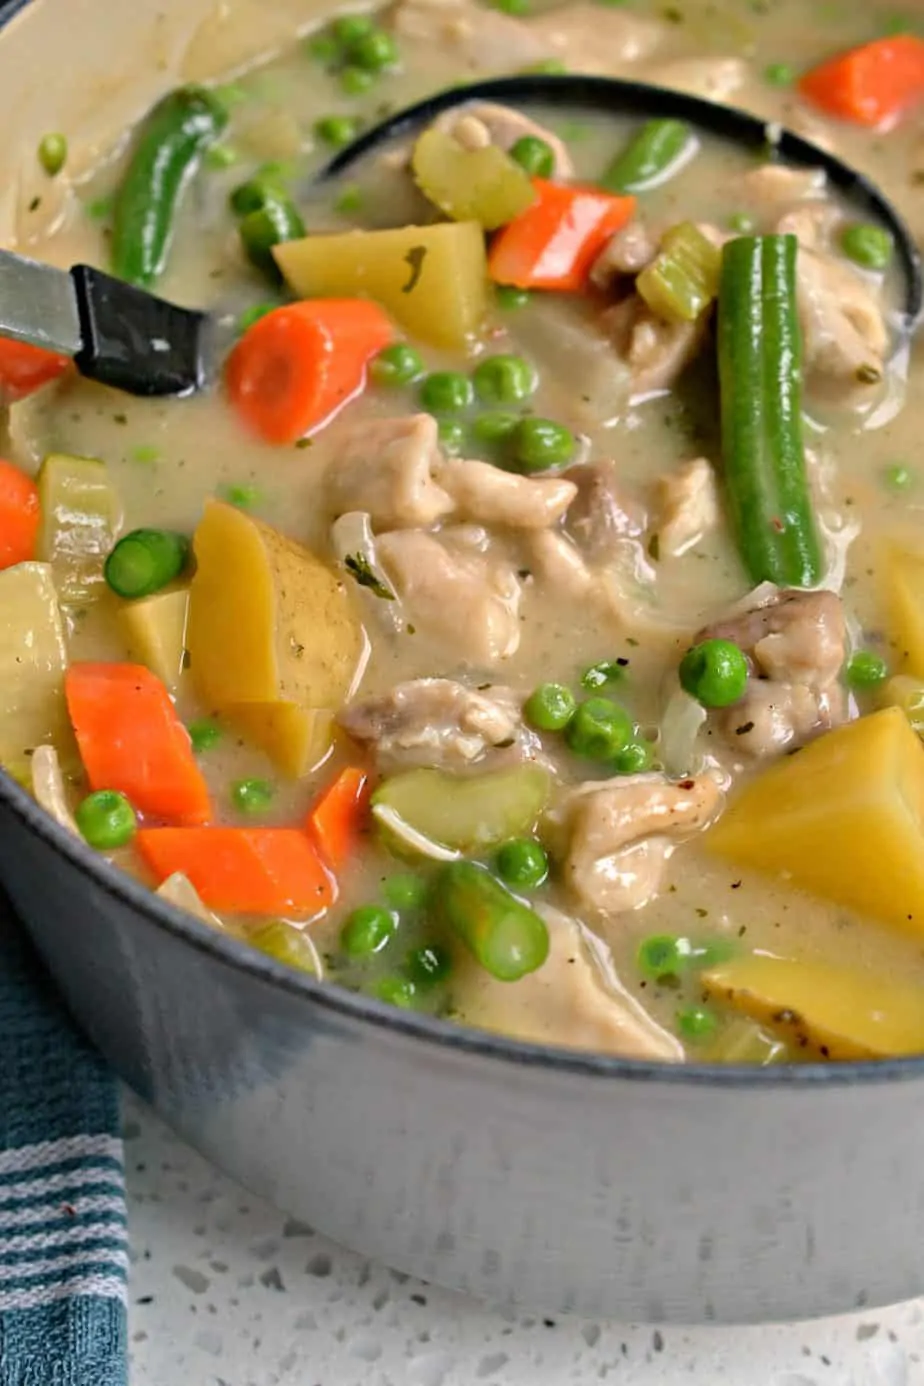 This easy Chicken Stew combines browned chicken thighs with onion, celery, carrots, potatoes, green beans, and peas in a rich creamy chicken broth that is perfectly seasoned